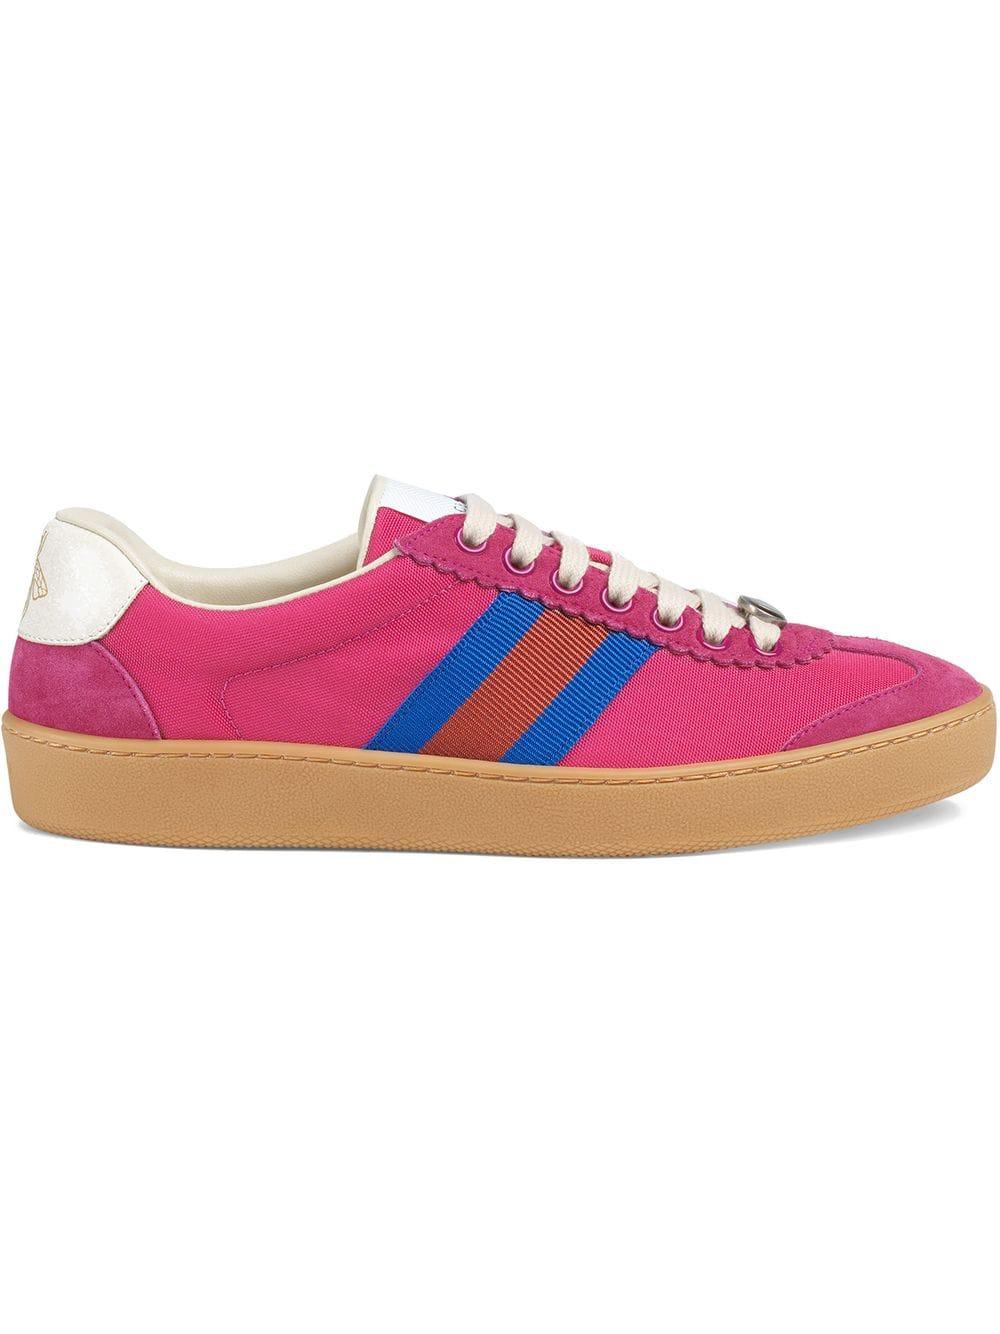 Gucci Synthetic Nylon And Suede Web Sneaker in Pink - Lyst